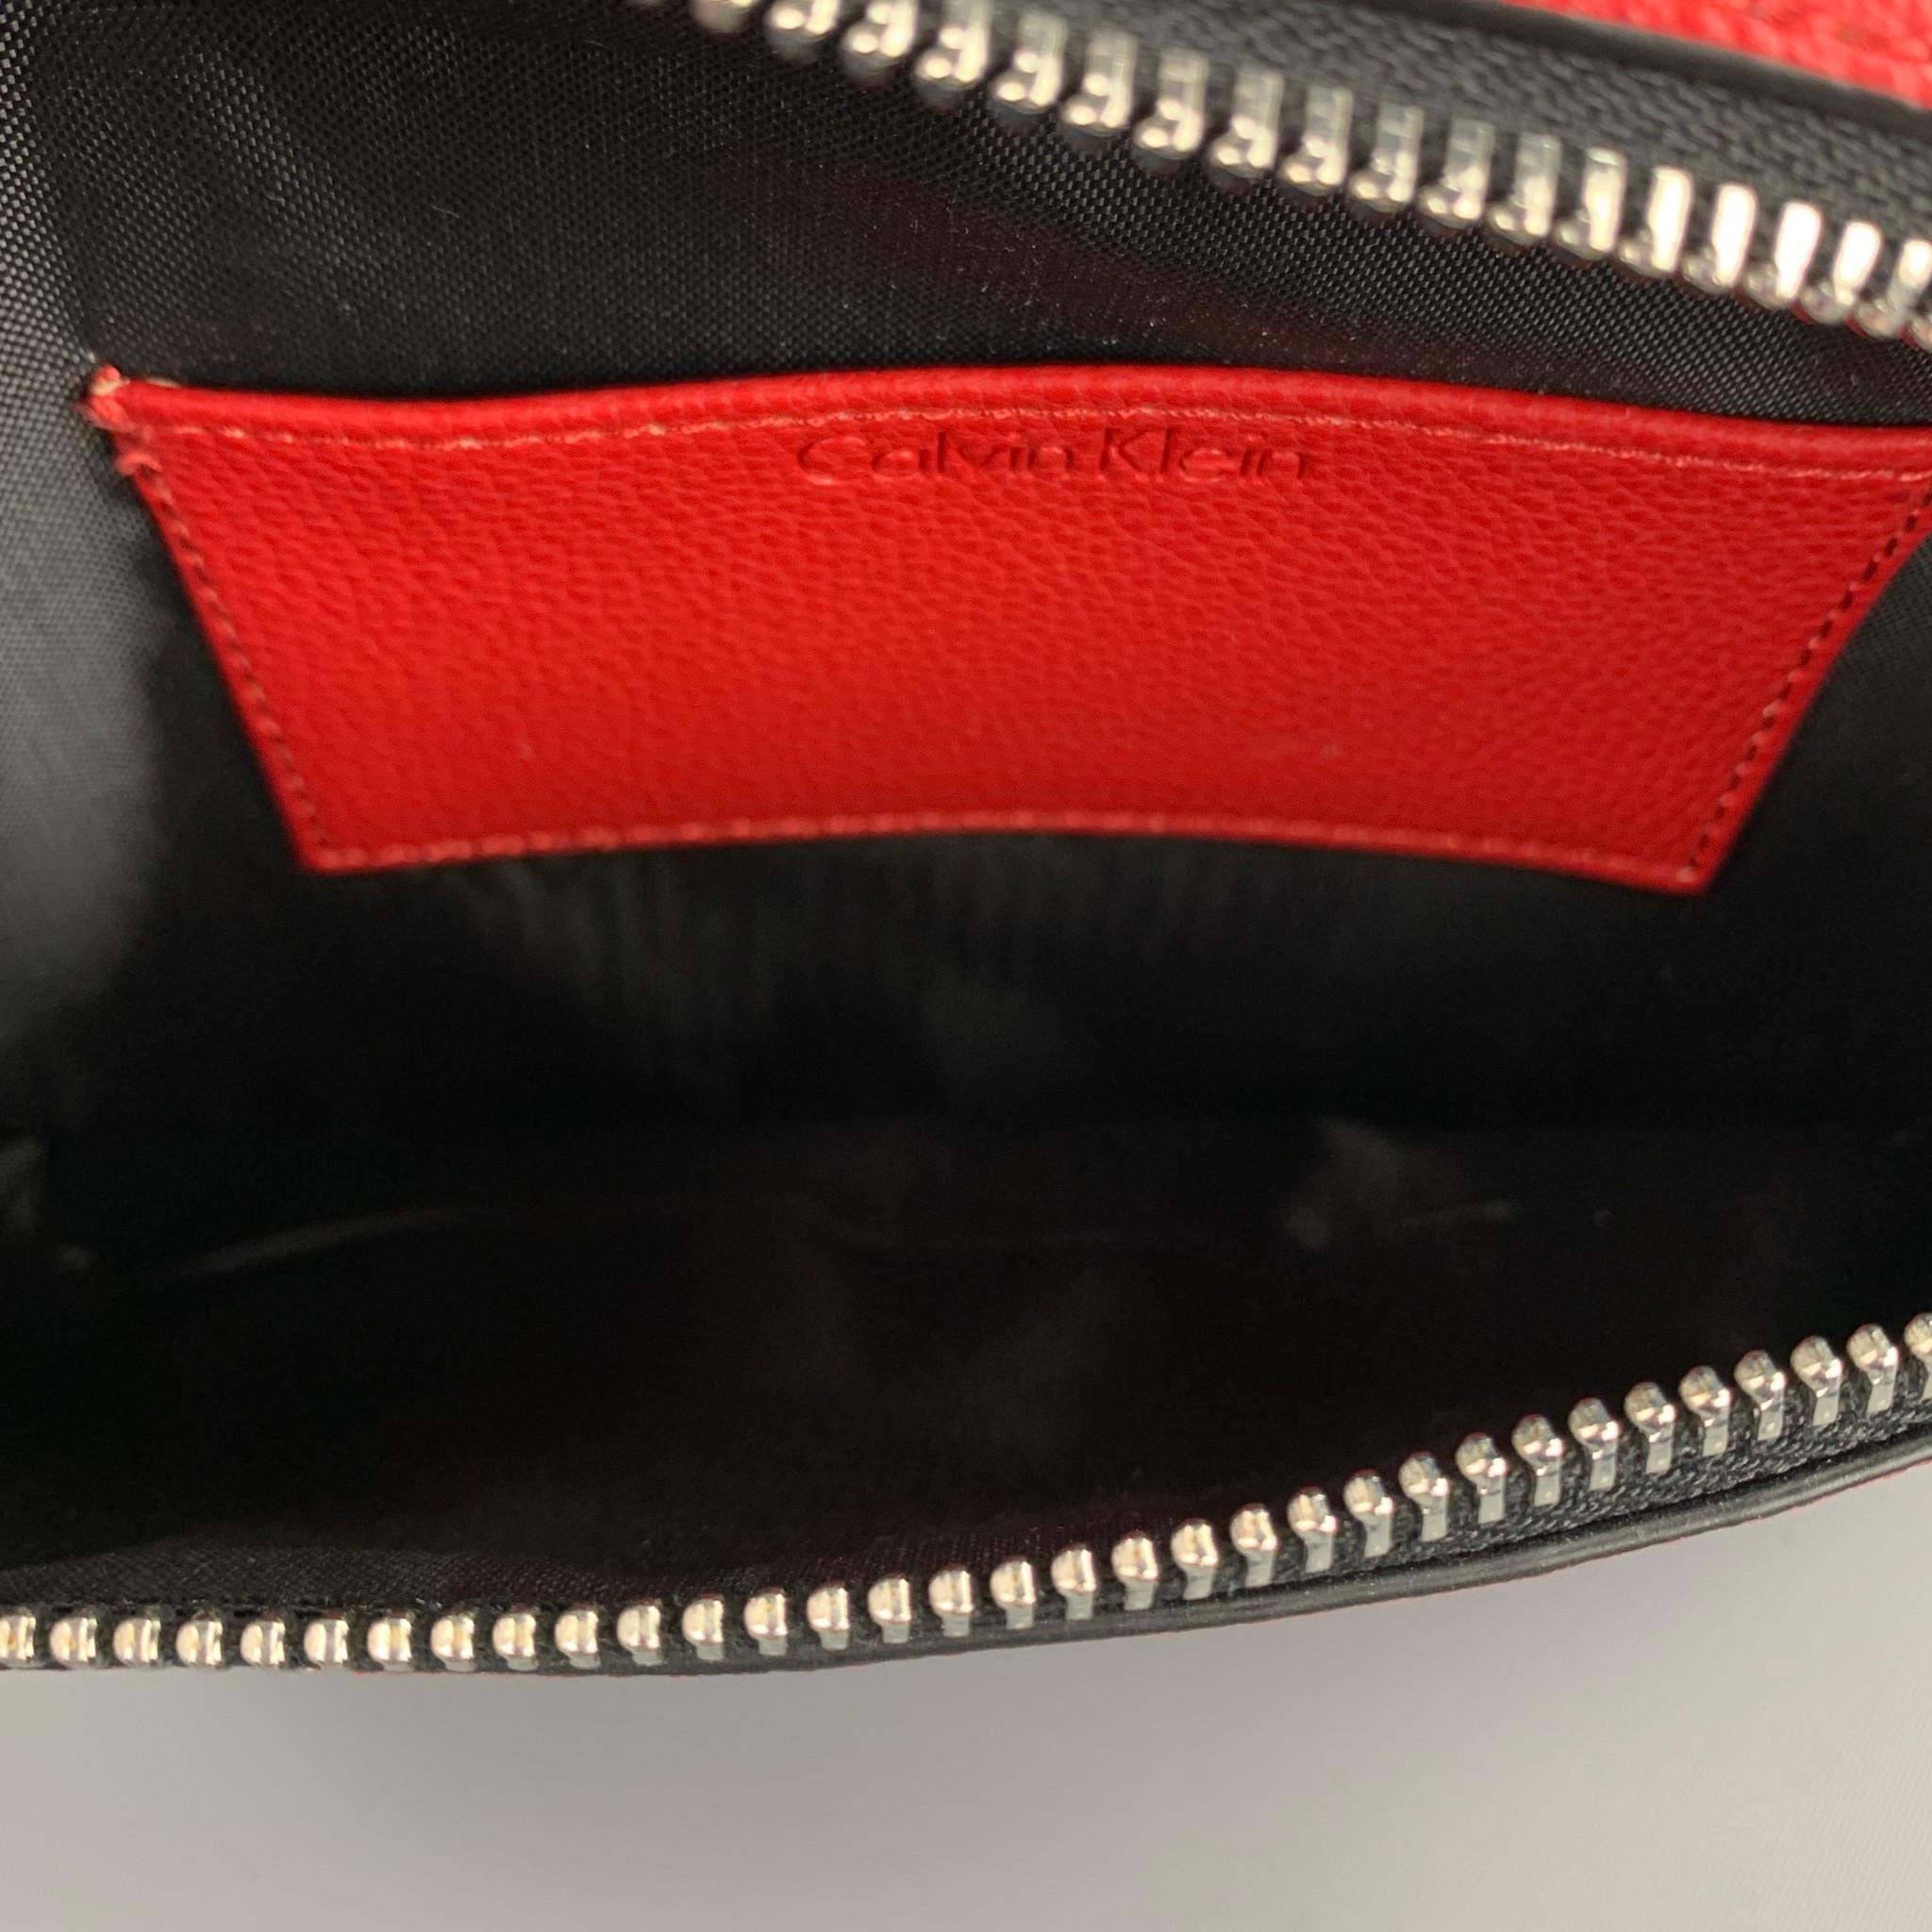 CALVIN KLEIN Red Pebble Grain Leather Fanny Pack 1